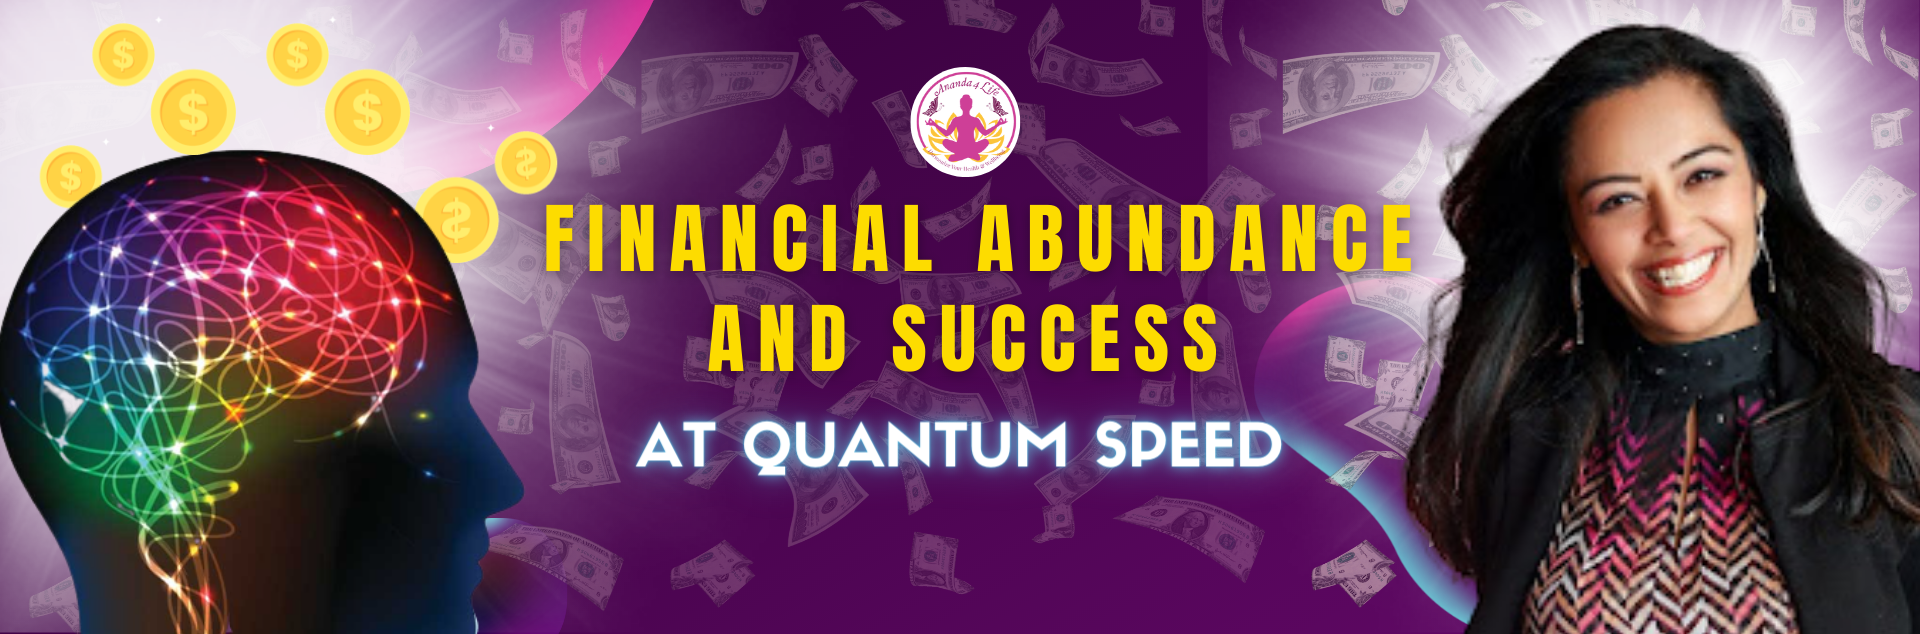 Financial Abundance and Success at Quantum Speed Package 1